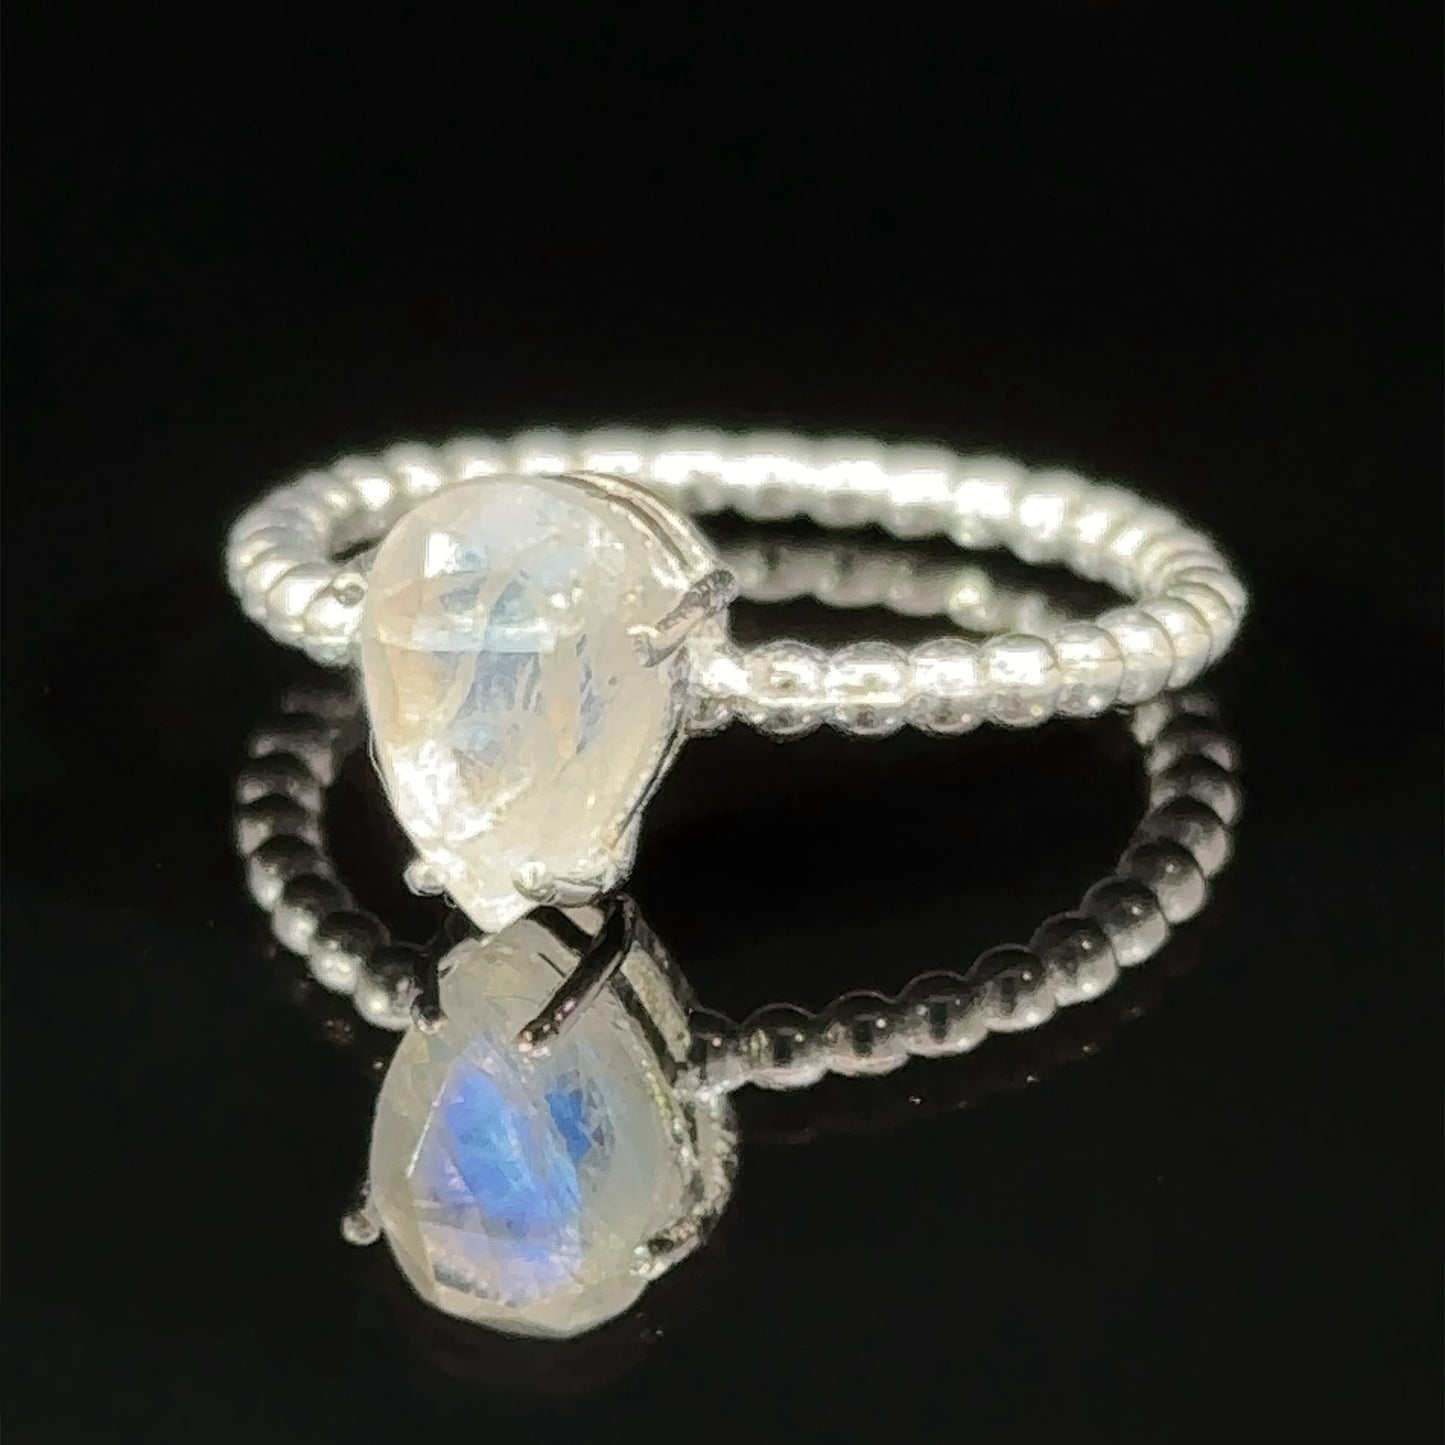 
                  
                    Vibrant Teardrop Gemstone Ring with Beaded Band with a pear-shaped opal set in a prong setting on a reflective surface against a black background.
                  
                